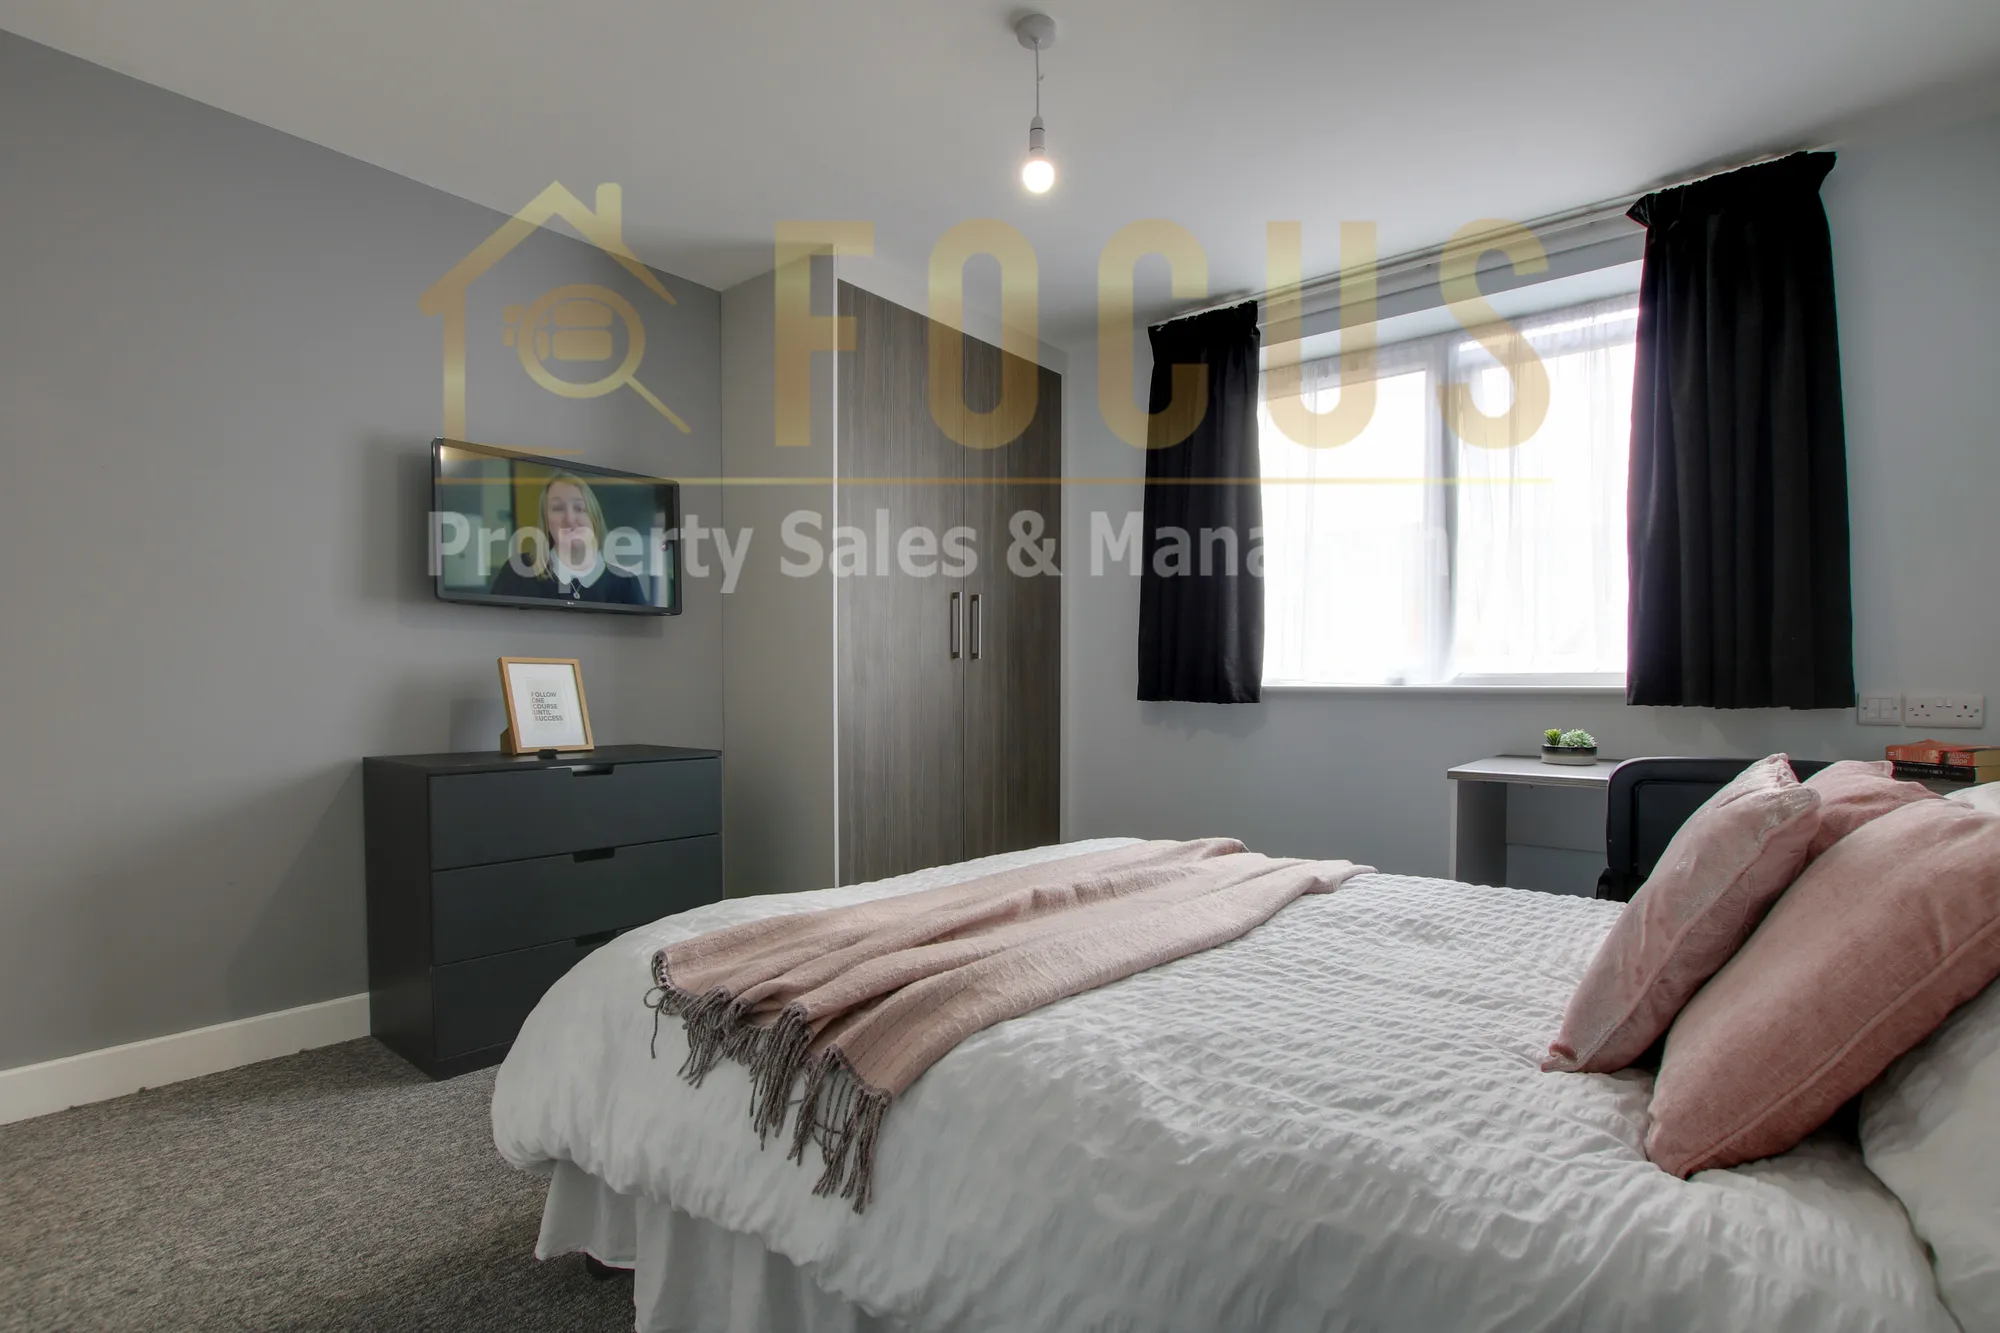 3 bed apartment to rent in Clarendon Park Road, Leicester  - Property Image 3